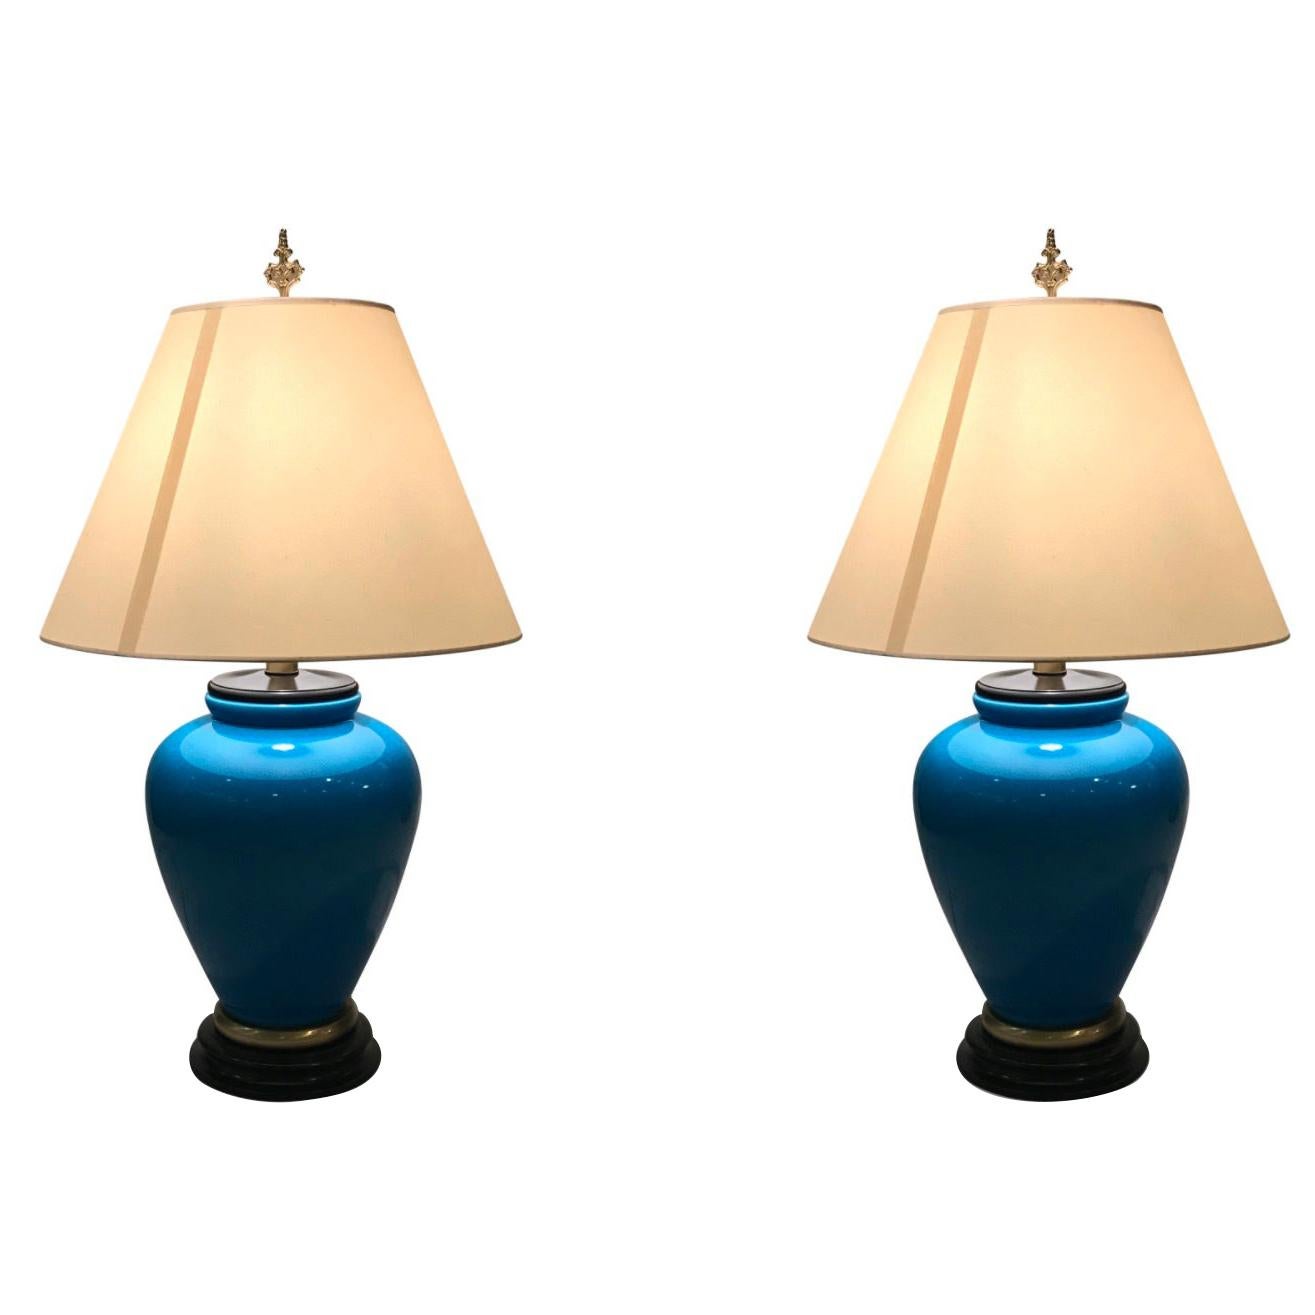 Pair of Large Blue Ceramic Lamps by Frederick Cooper